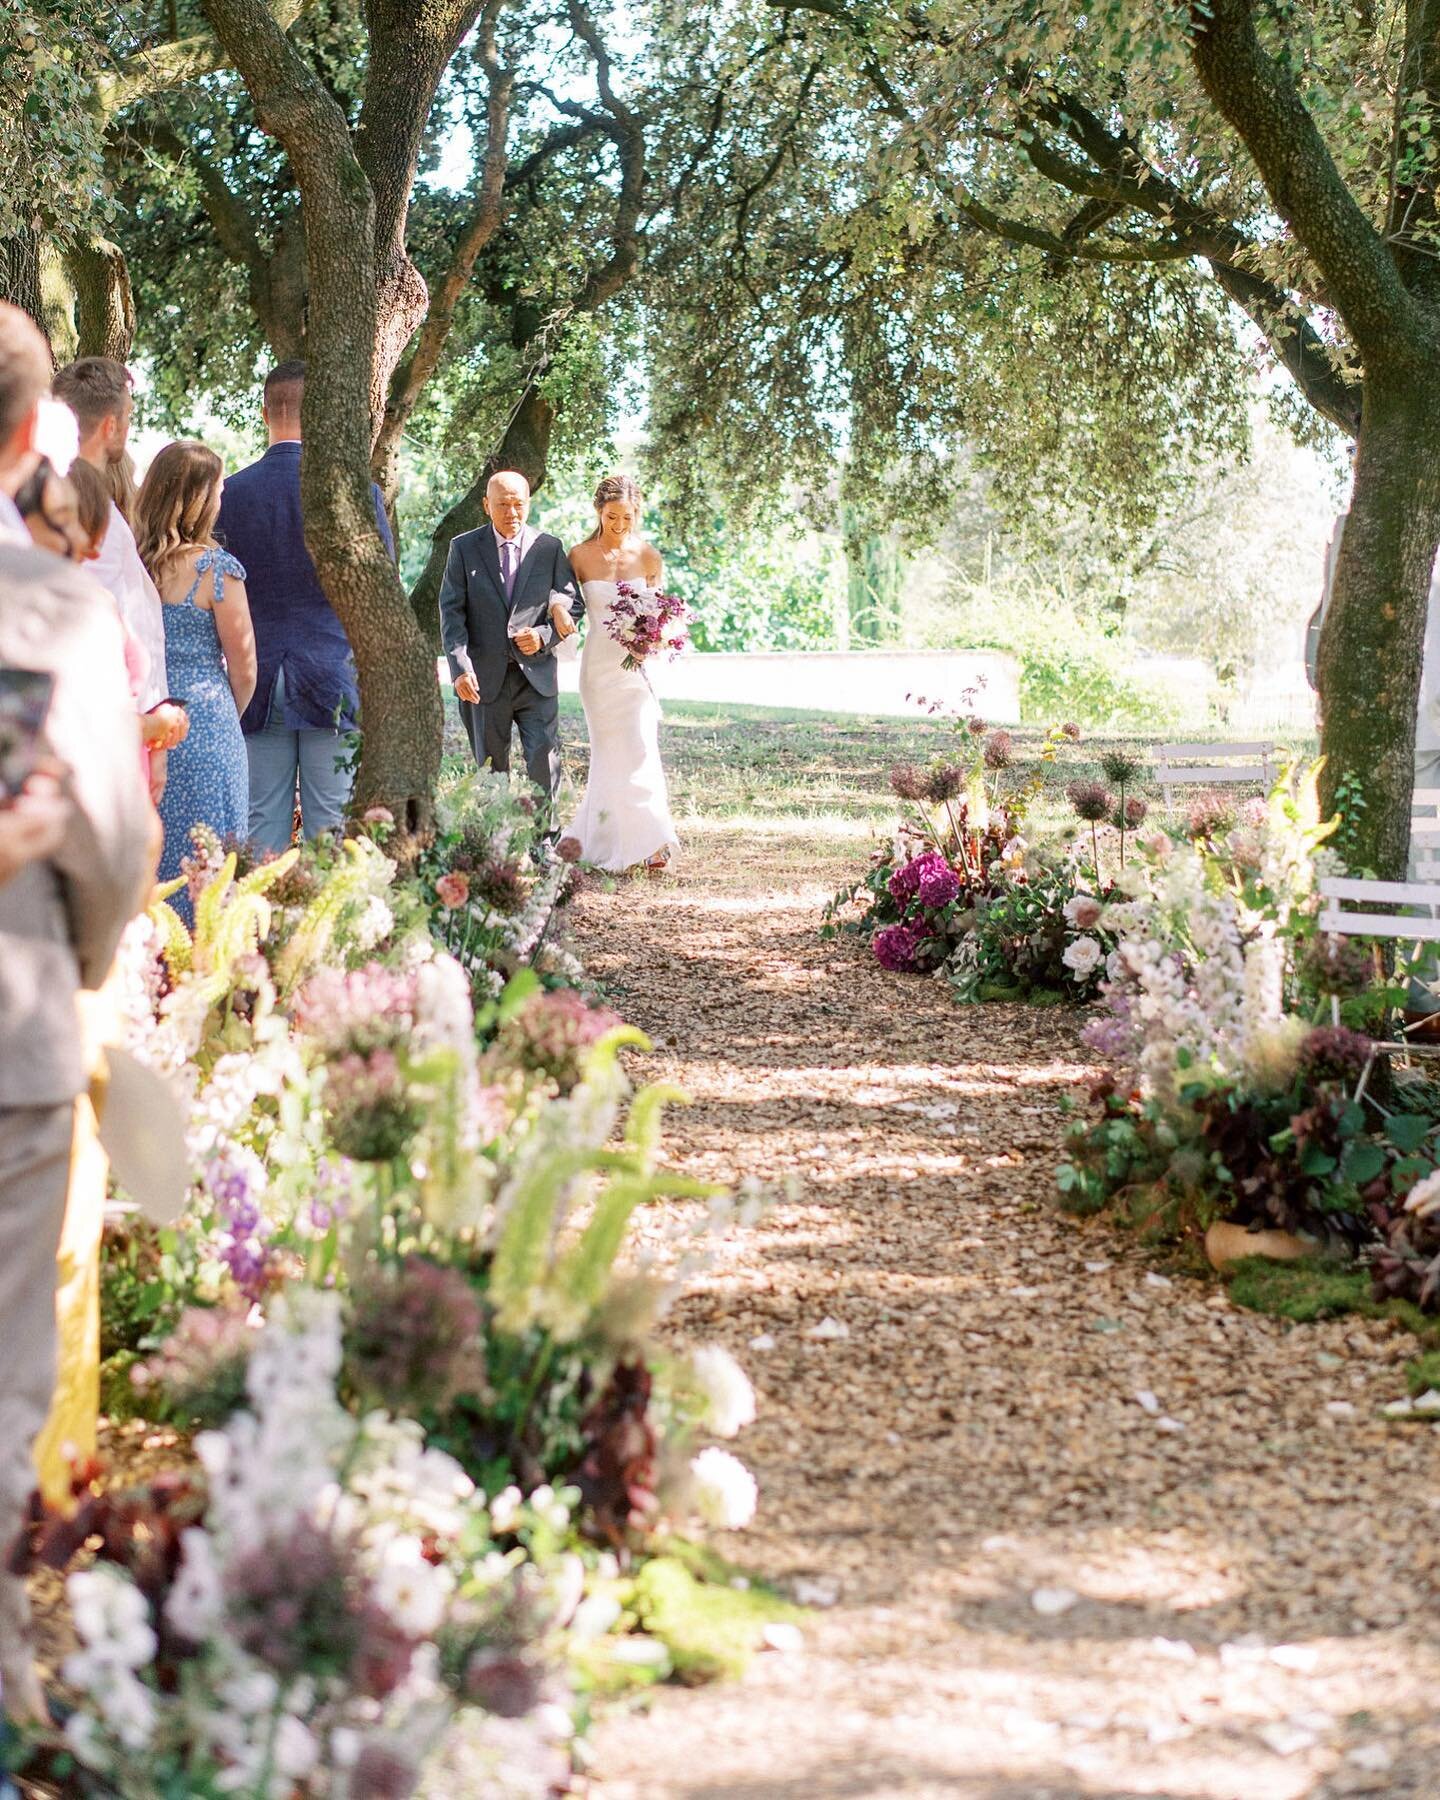 Getting married in a enchanted forest 🌳

Throwback on this &laquo; growing from the ground &raquo; purple ceremony aisle at T &amp; B  weddings in the forest of the beautiful @lesdomainesdepatras &hellip;

We want to see more  forest ceremony not yo